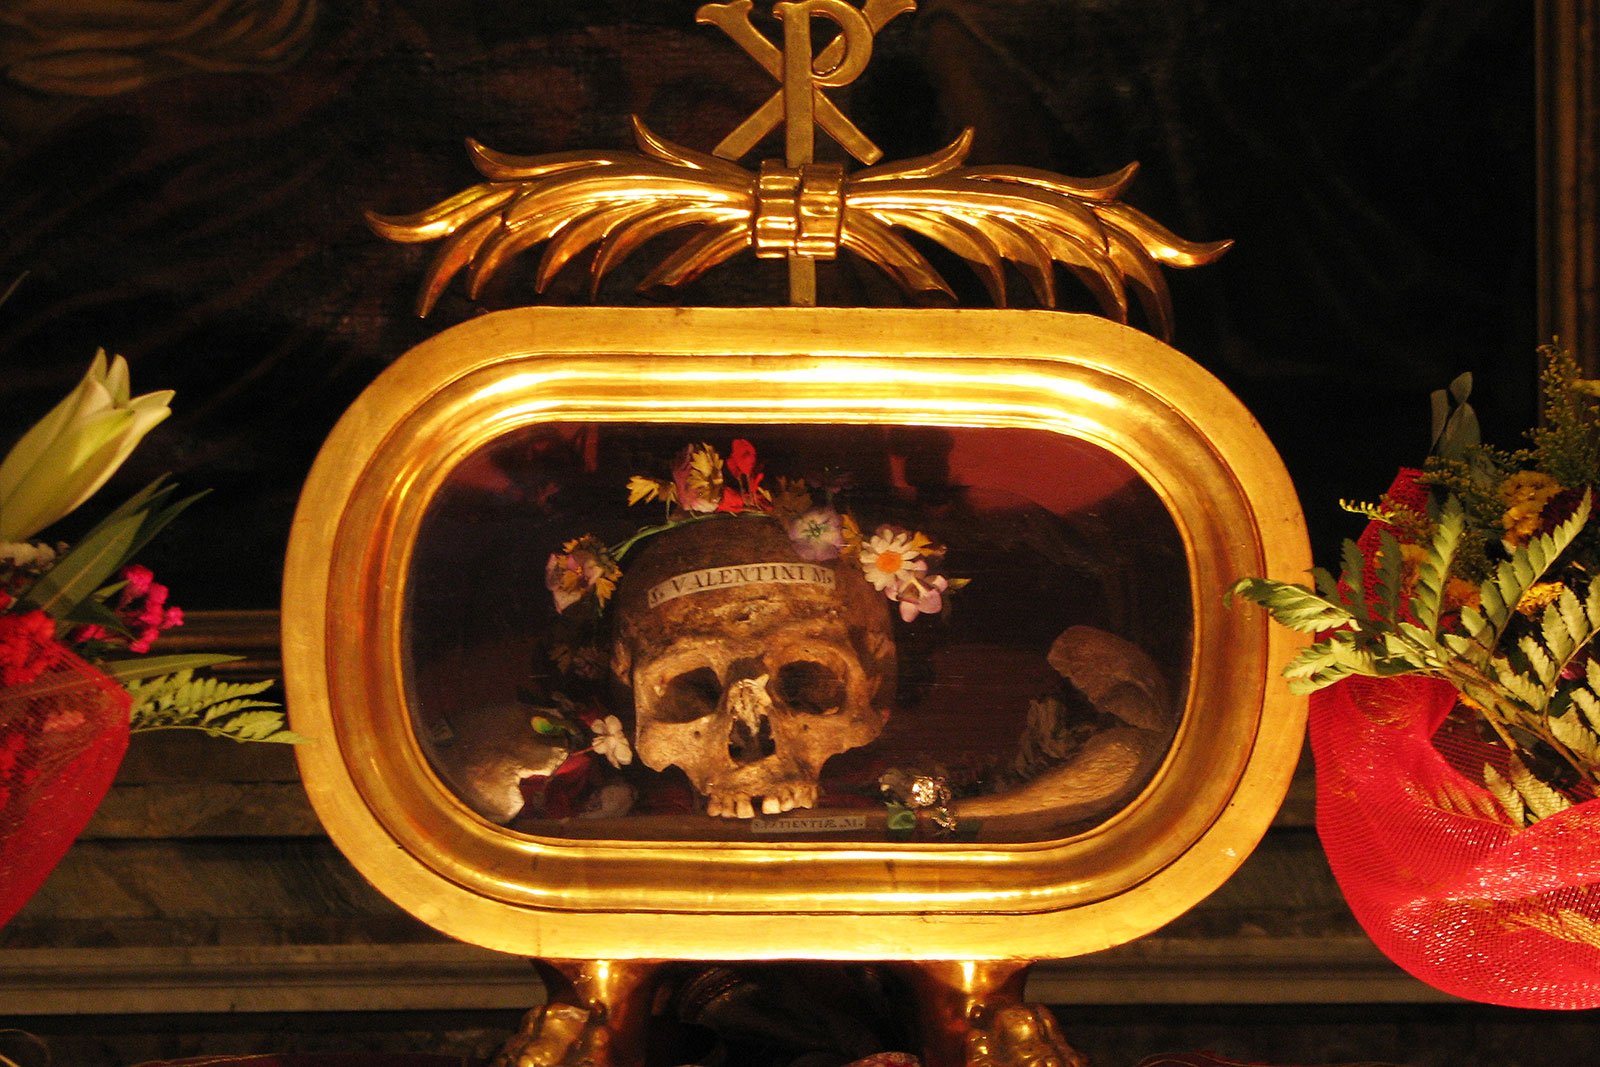 How to see the Saint Valentine's skull in Rome